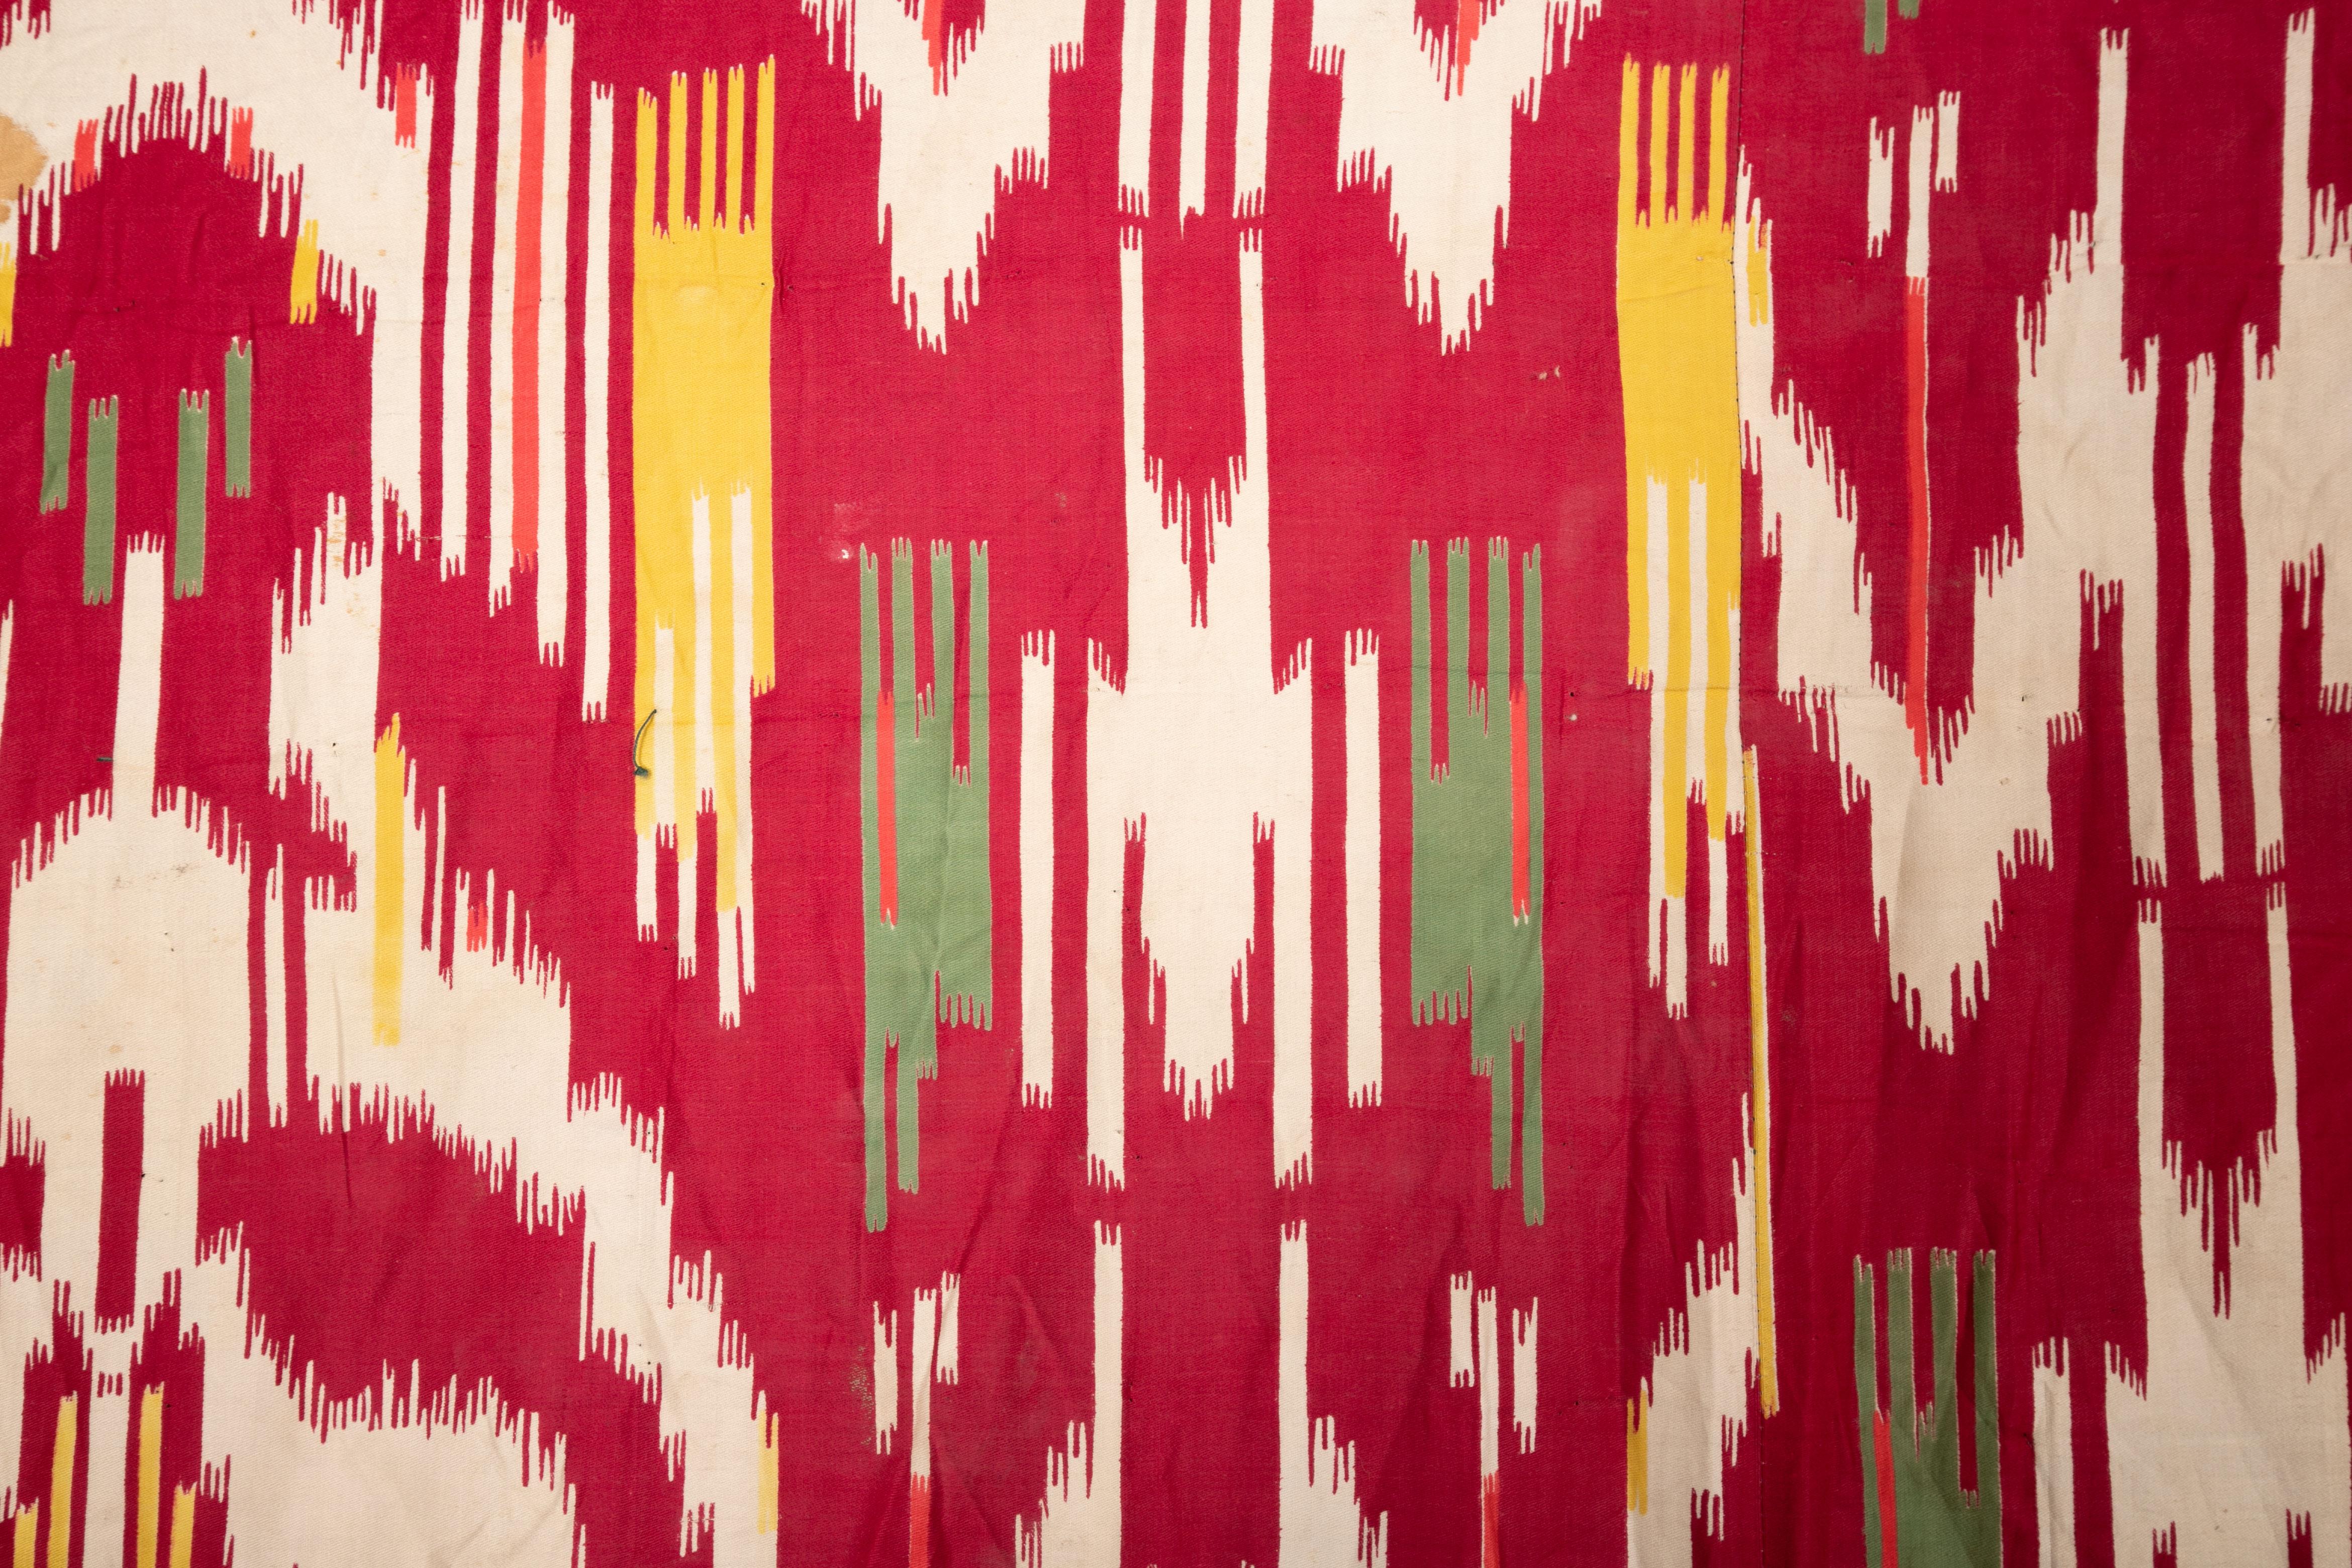 Russian Printed Ikat Design Cotton Fabric Panel, Mid-20th Century or Earlier For Sale 3